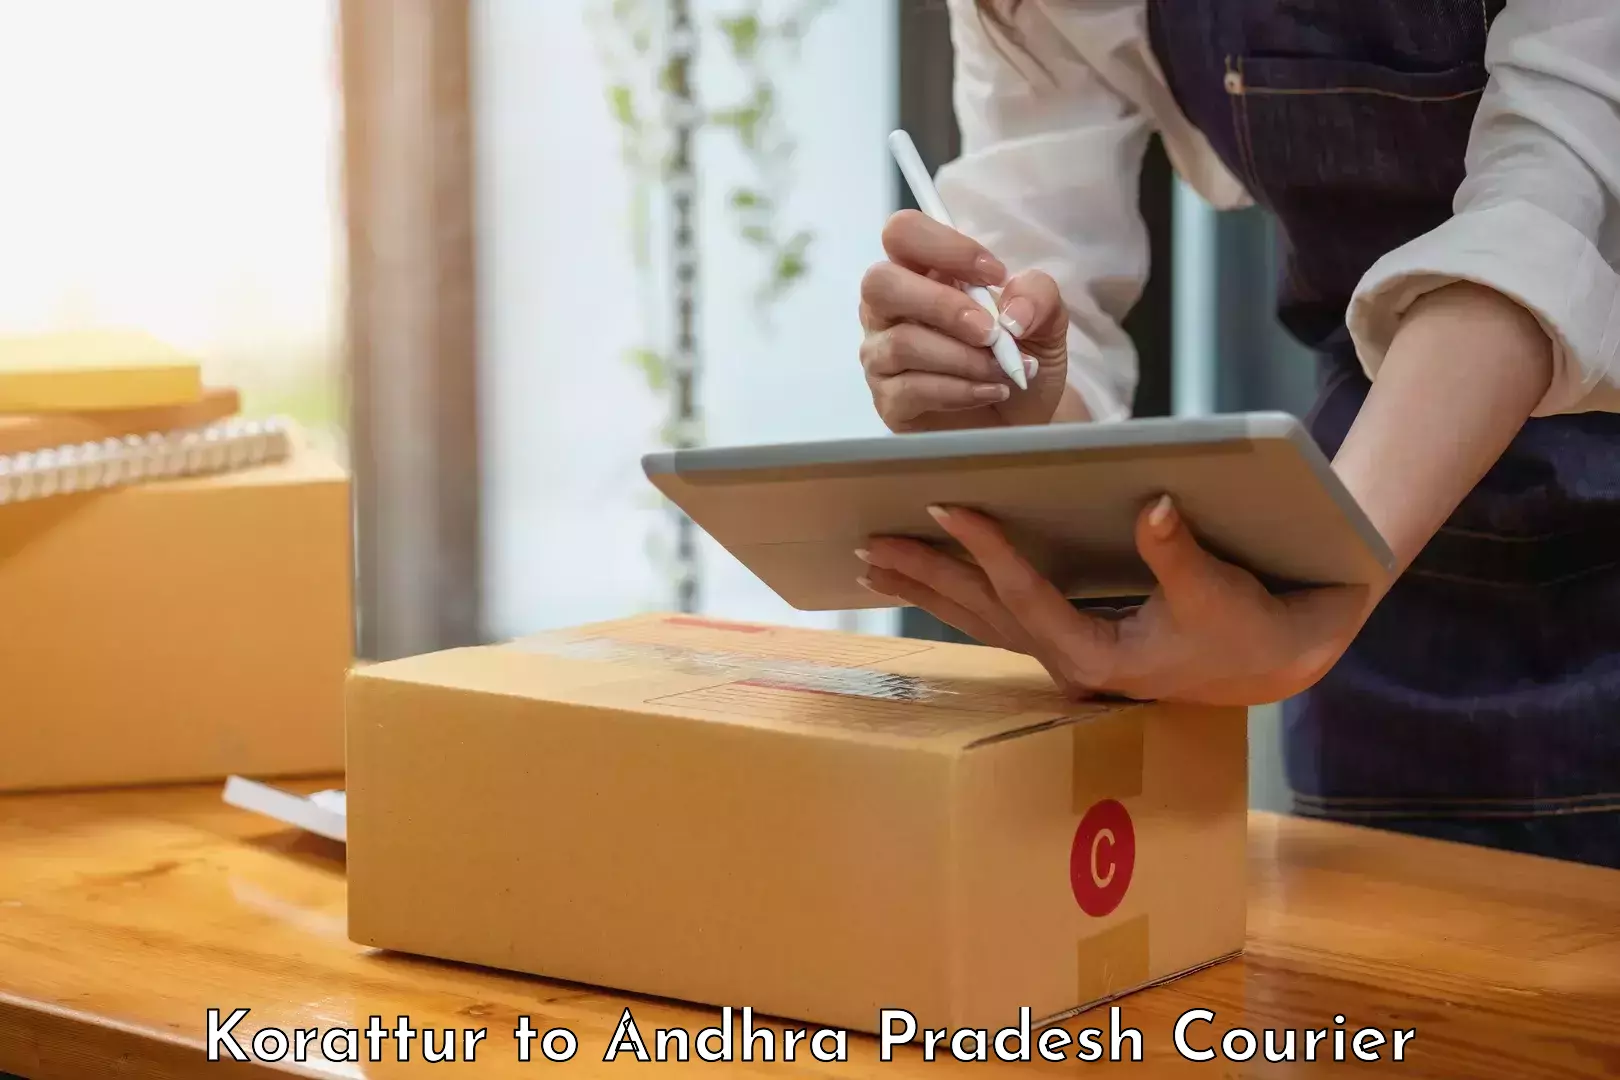 Full-service courier options in Korattur to Giddalur